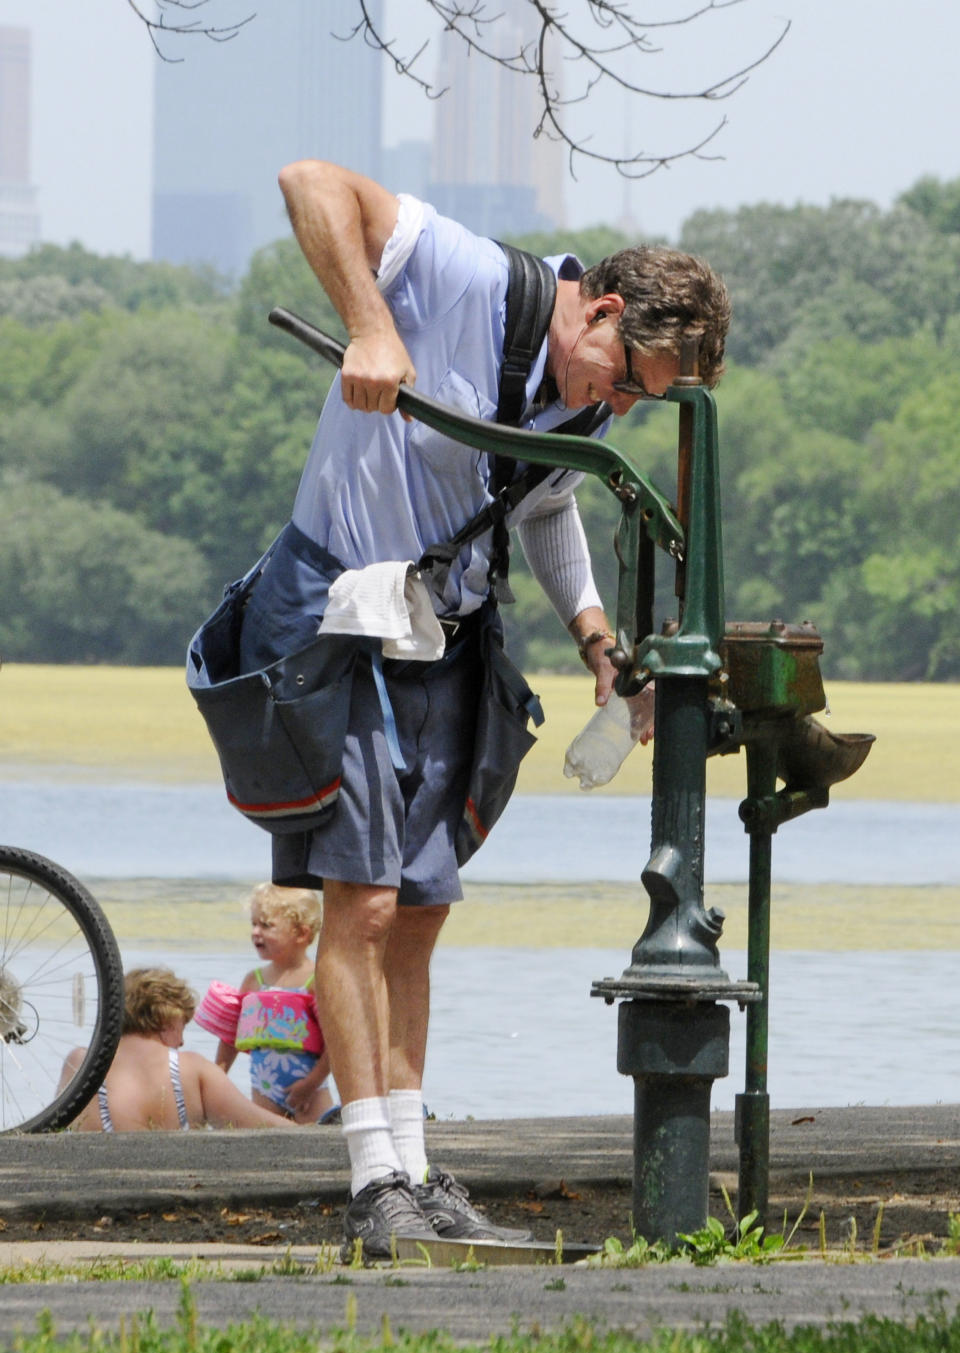 Postal carrier Paul Schimke takes a break to pump water into his bottle at an old-fashioned pump along Lake Harriet Friday, July 6, 2012 in Minneapolis where temperatures reached into the upper 90's for another day during the heat wave. The National Weather Service said the record-breaking heat that has baked the nation’s midsection for several days was slowly moving into the mid-Atlantic states and Northeast. Excessive-heat warnings remained in place Friday for all of Iowa, Indiana and Illinois as well as much of Wisconsin, Michigan, Missouri, Ohio and Kentucky. (AP Photo/Jim Mone)